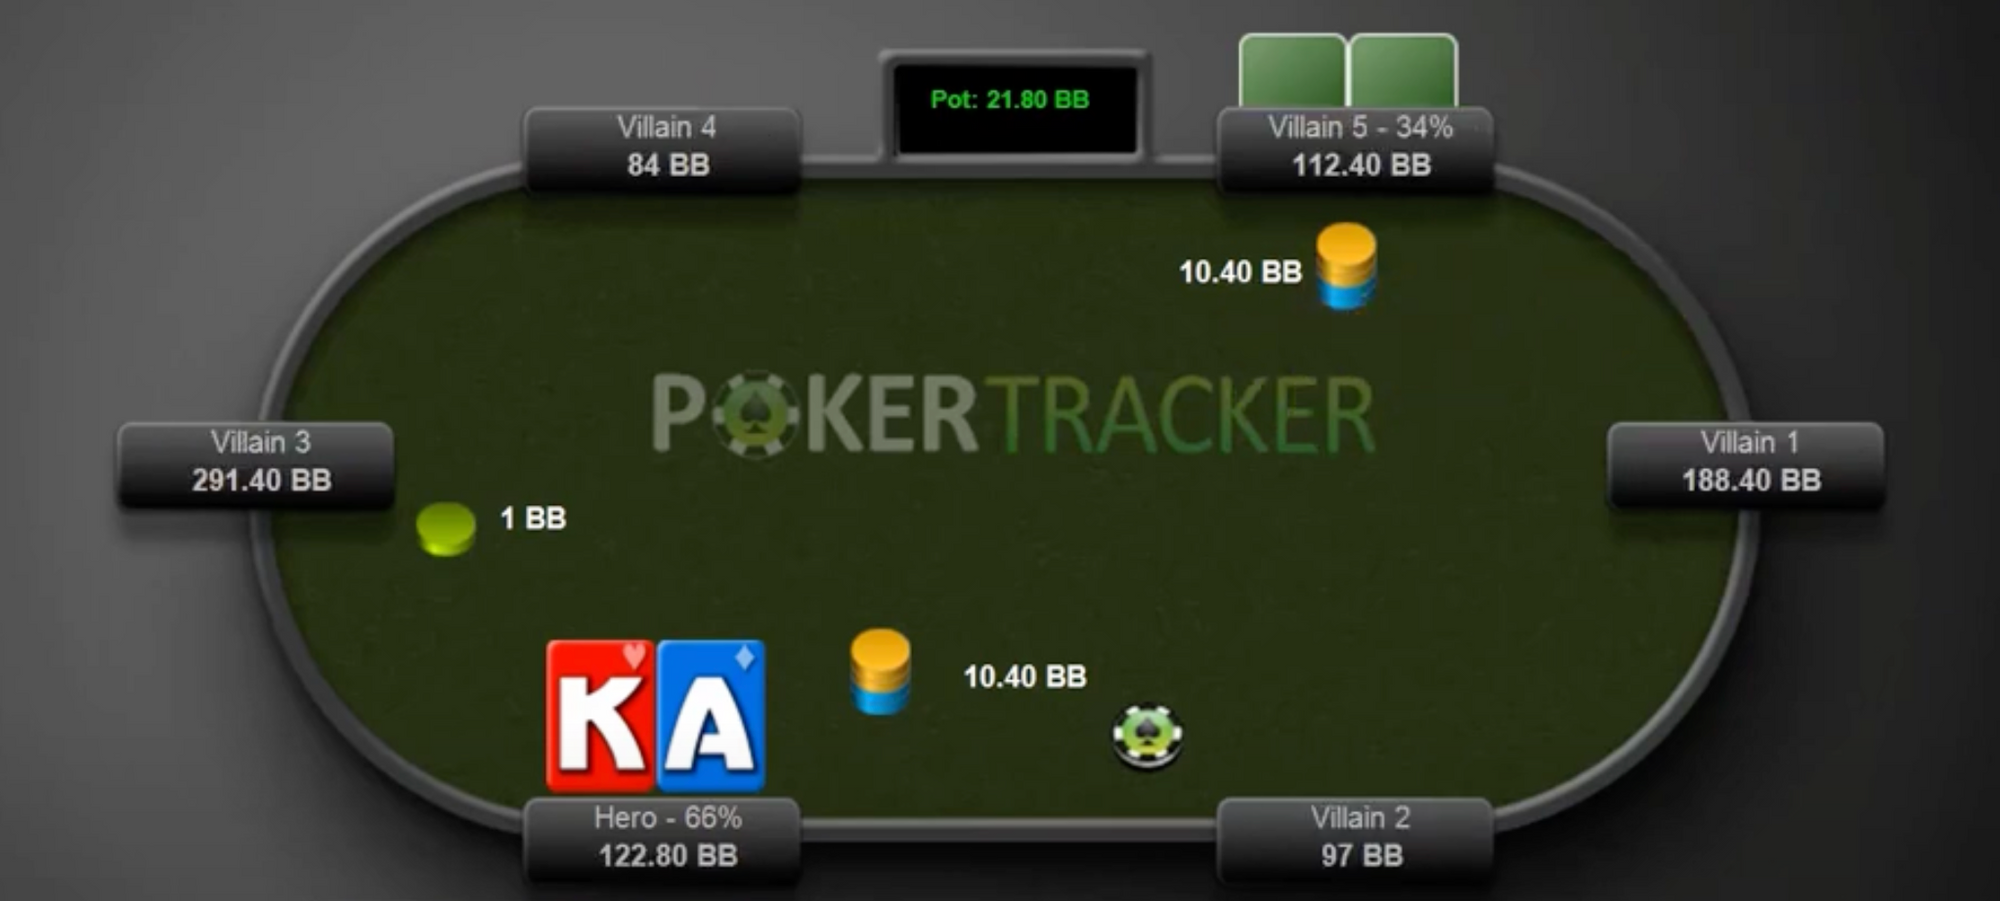 Pockertracking 4's Player Profiling for Poker tools 